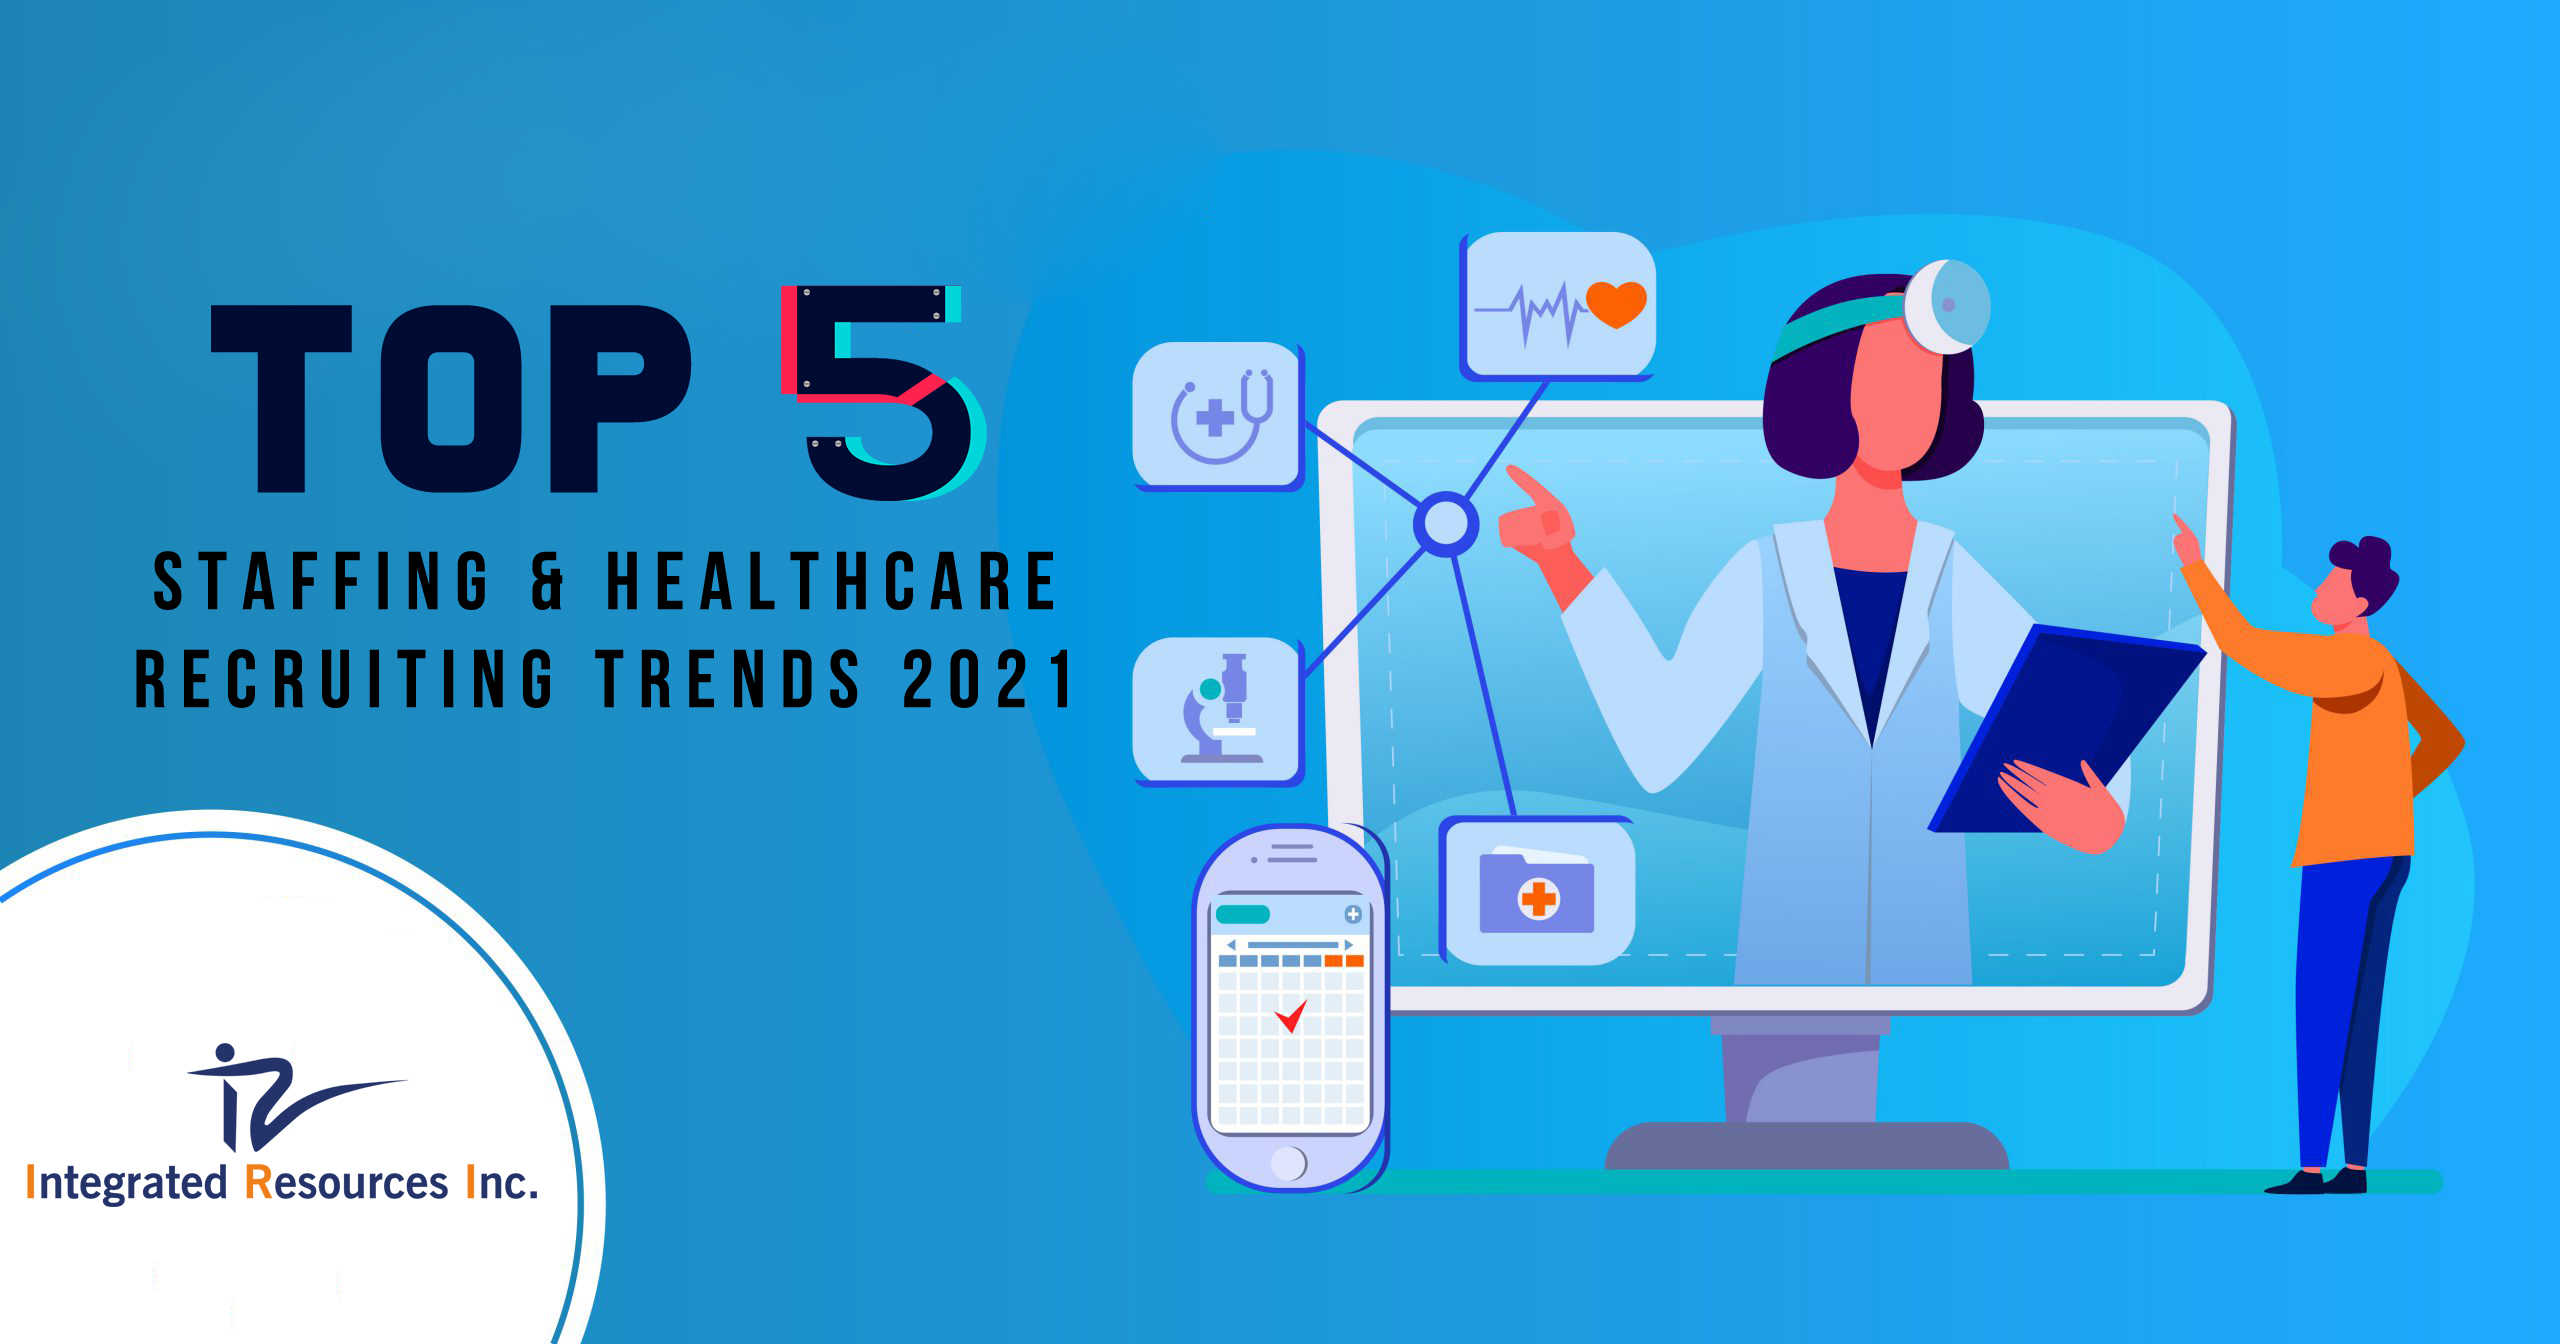 Healthcare and Staffing Trends 2021